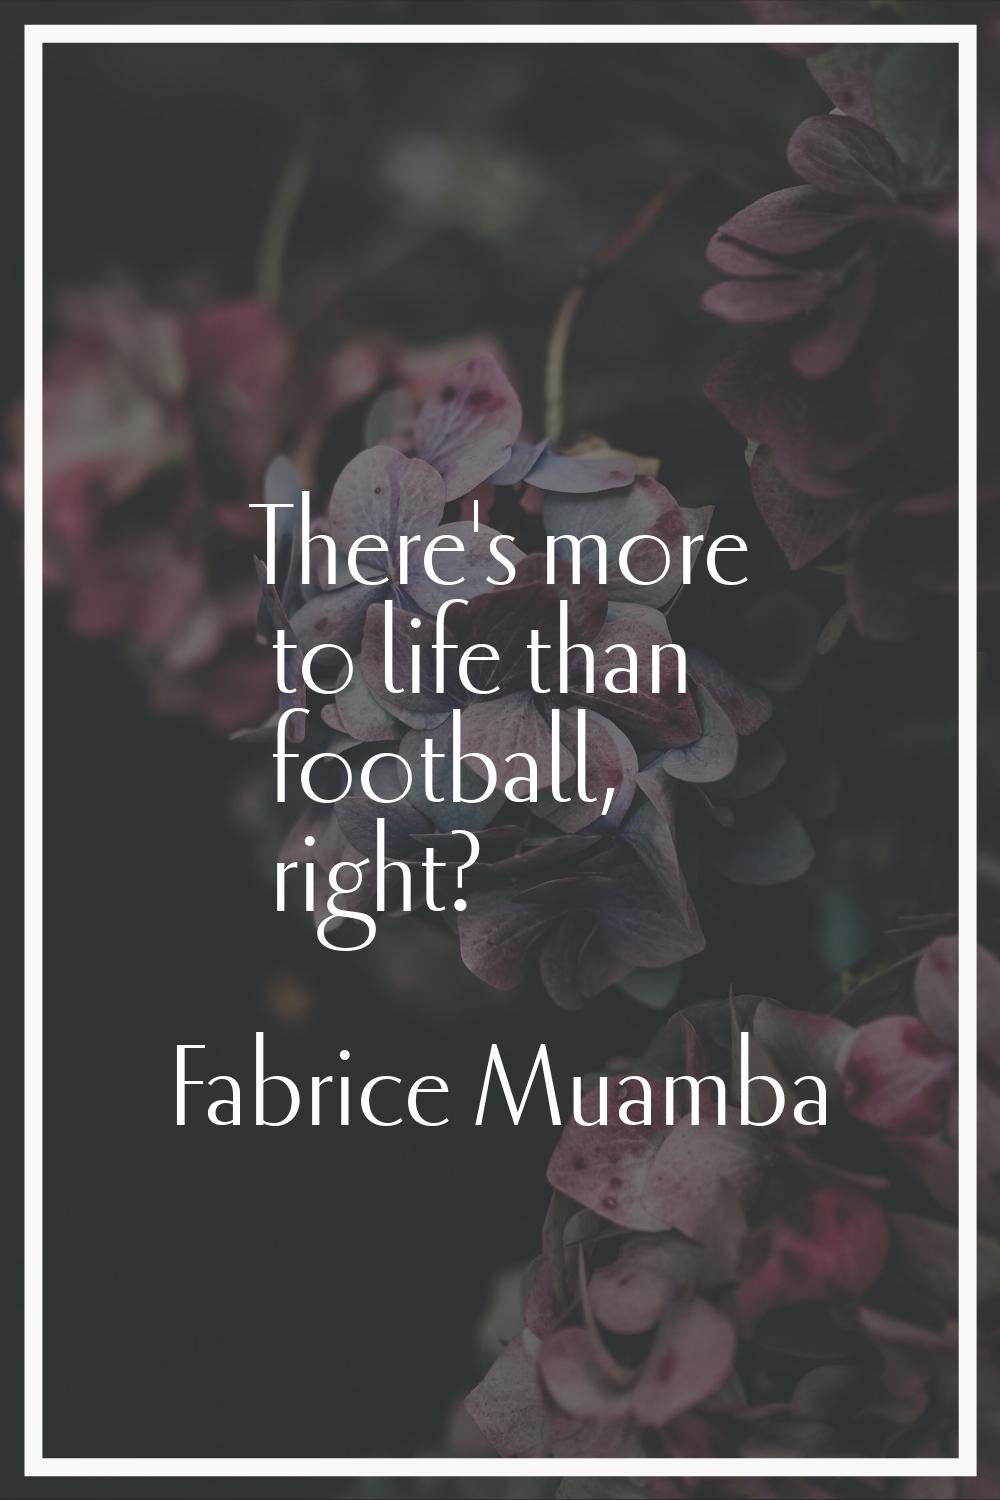 There's more to life than football, right?